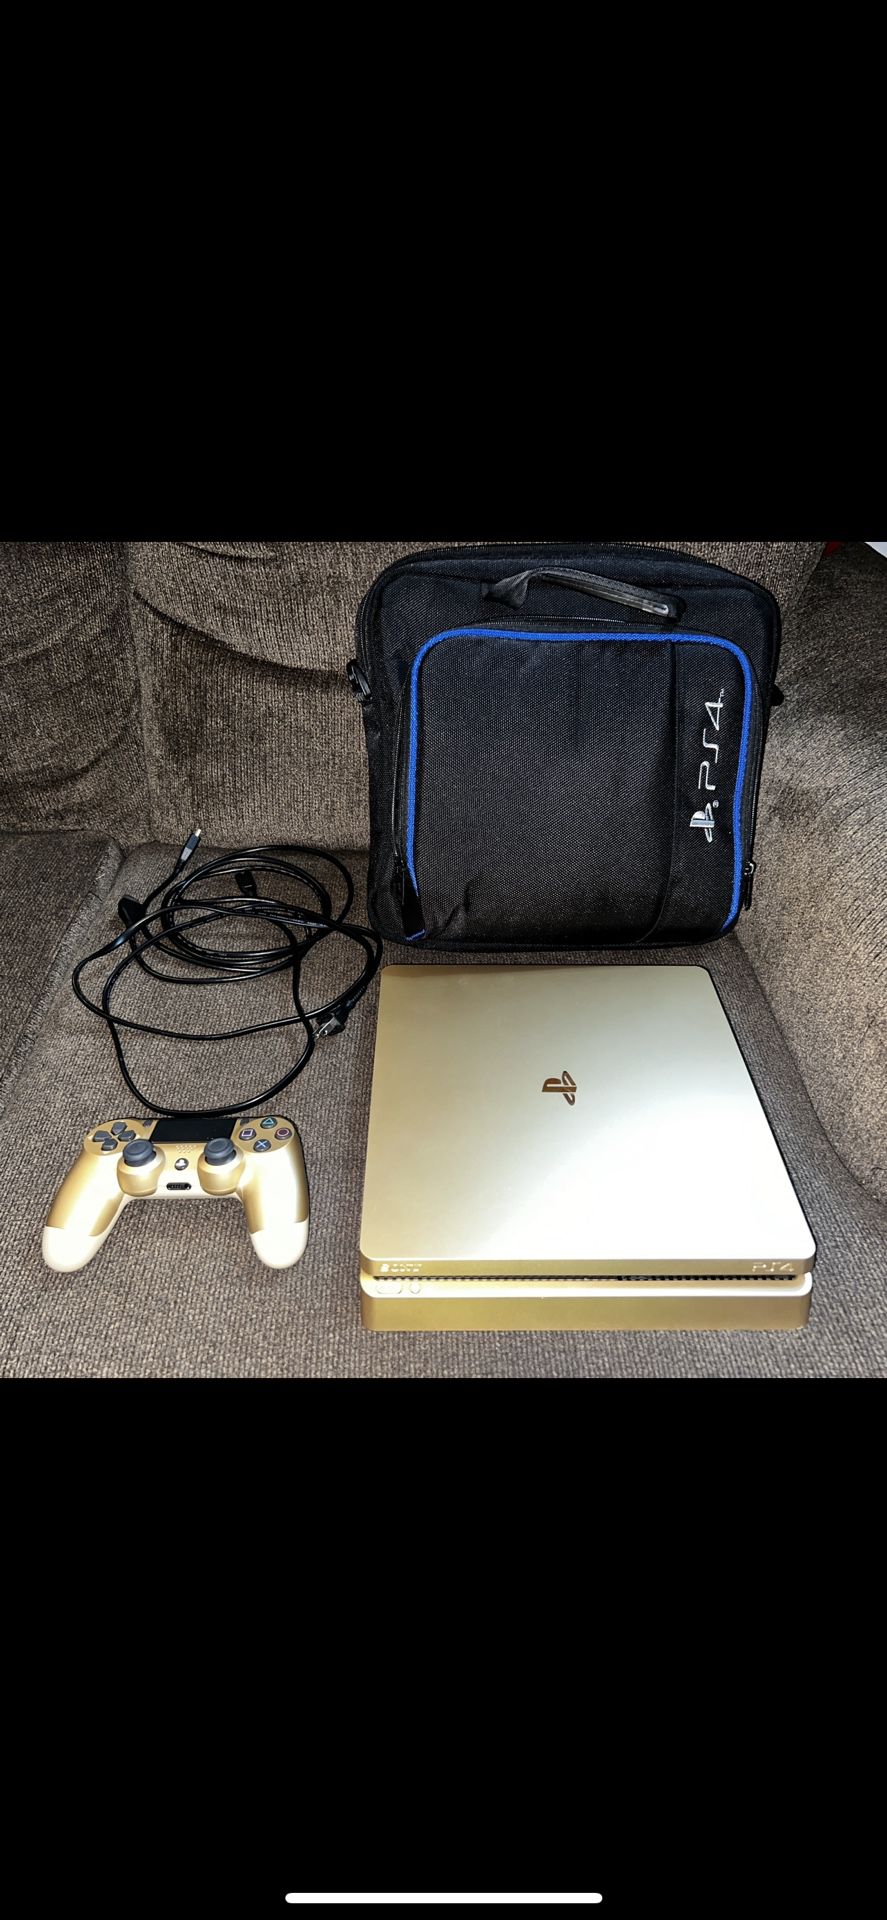 PS4 SLIM LIMITED EDITION GOLD 1TB